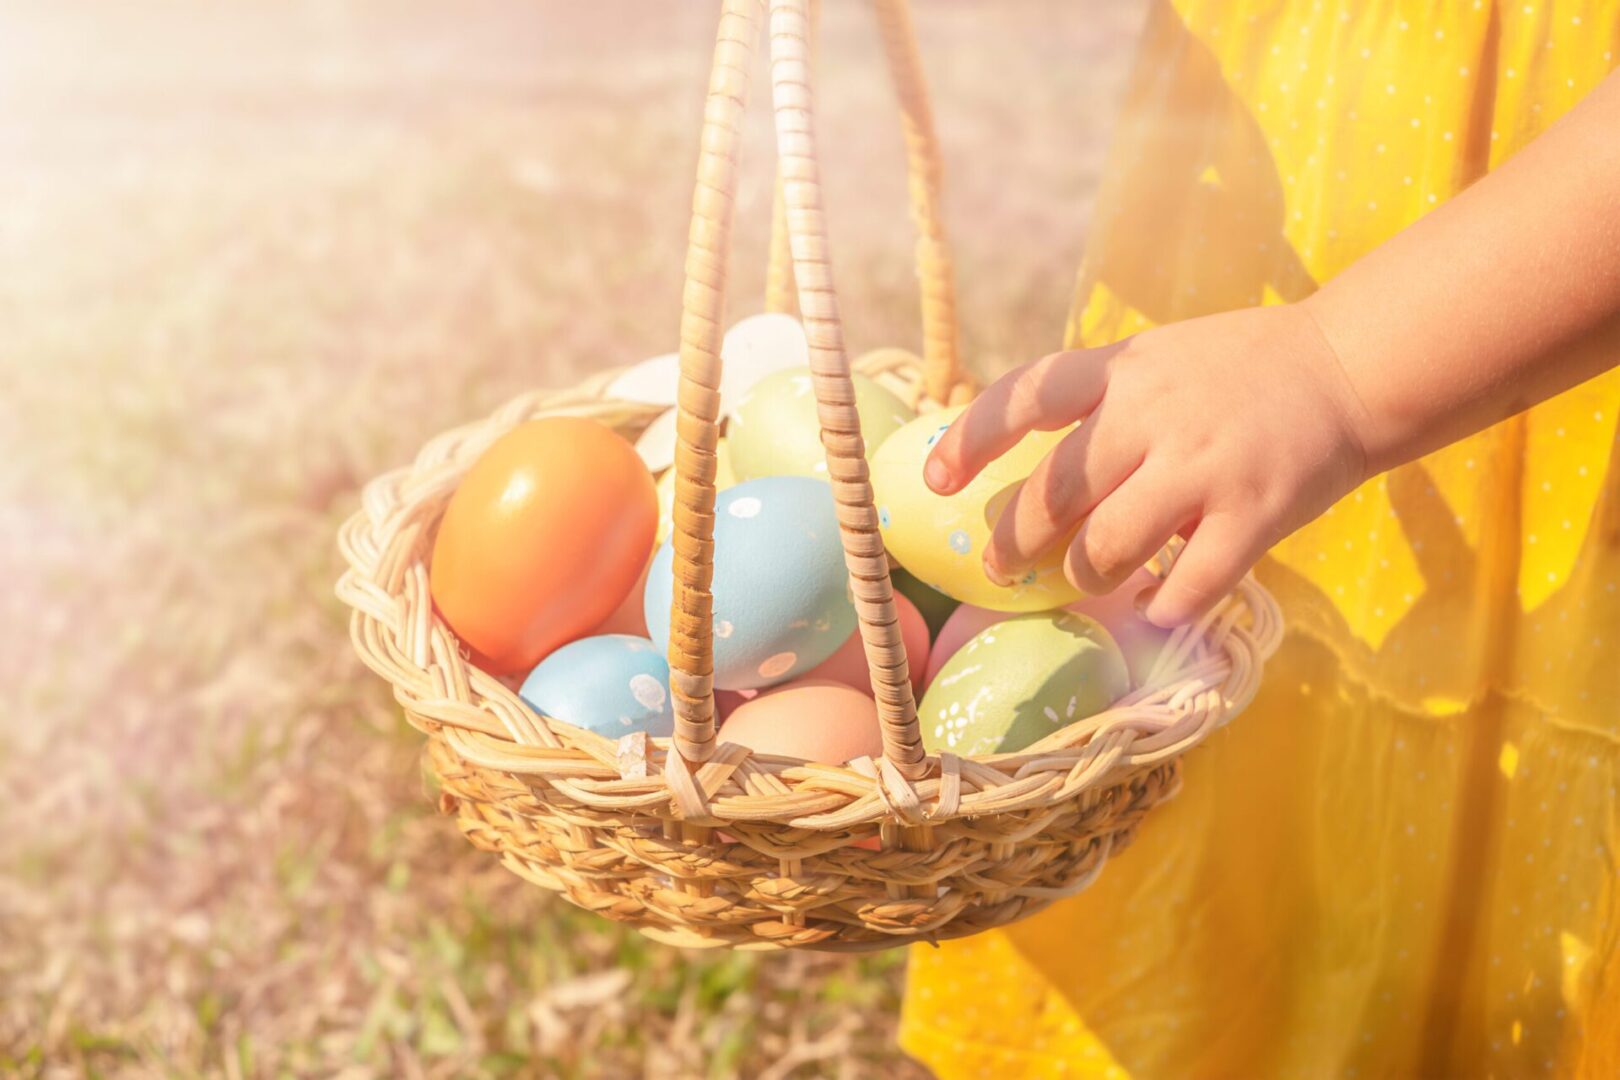 A child takes out an Easter egg from a basket in a meadow